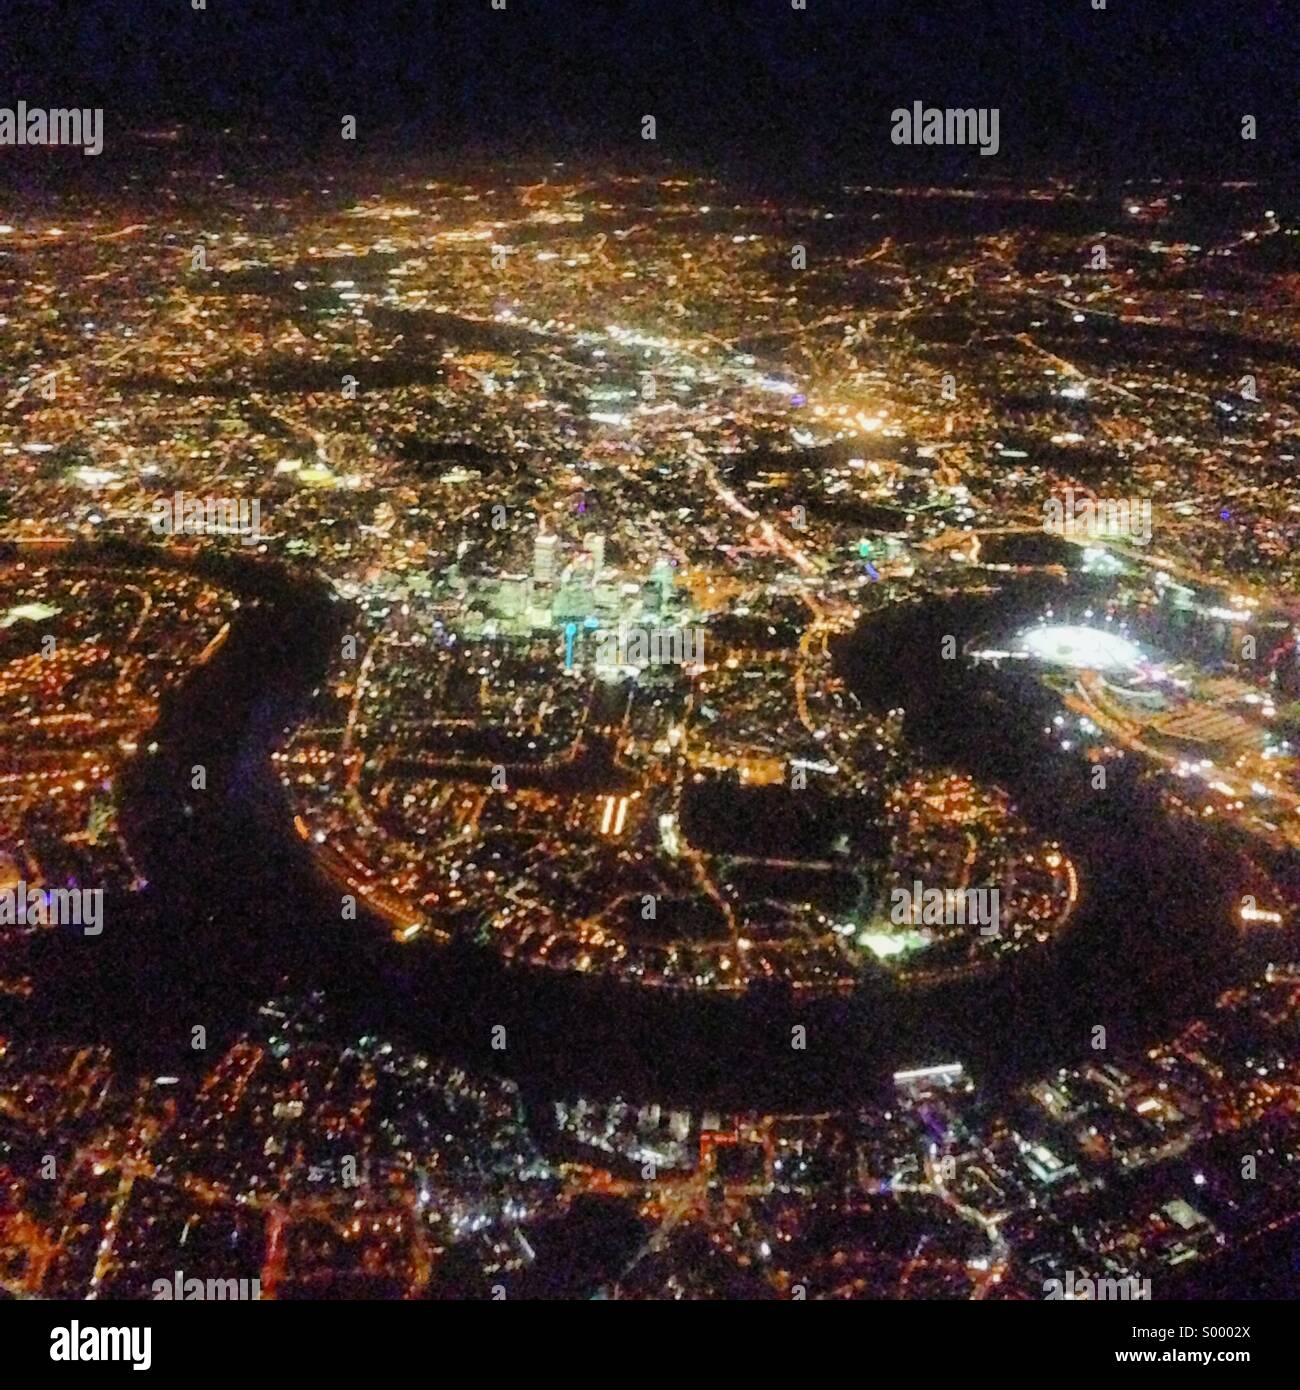 The Thames river and Central London from the air at night Stock Photo